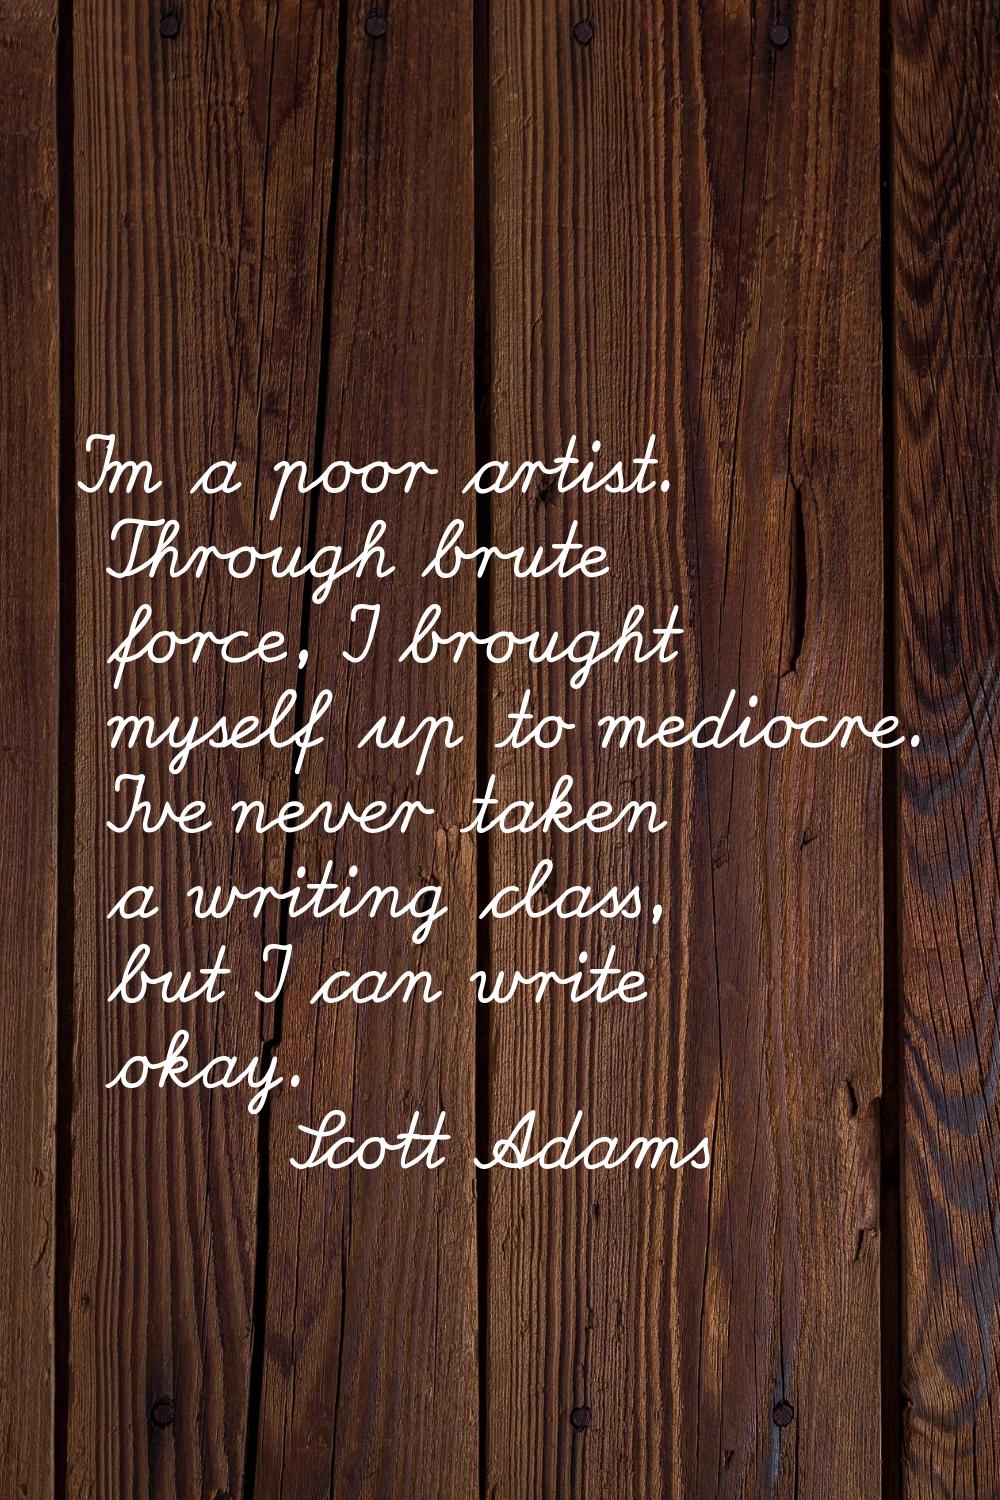 I'm a poor artist. Through brute force, I brought myself up to mediocre. I've never taken a writing